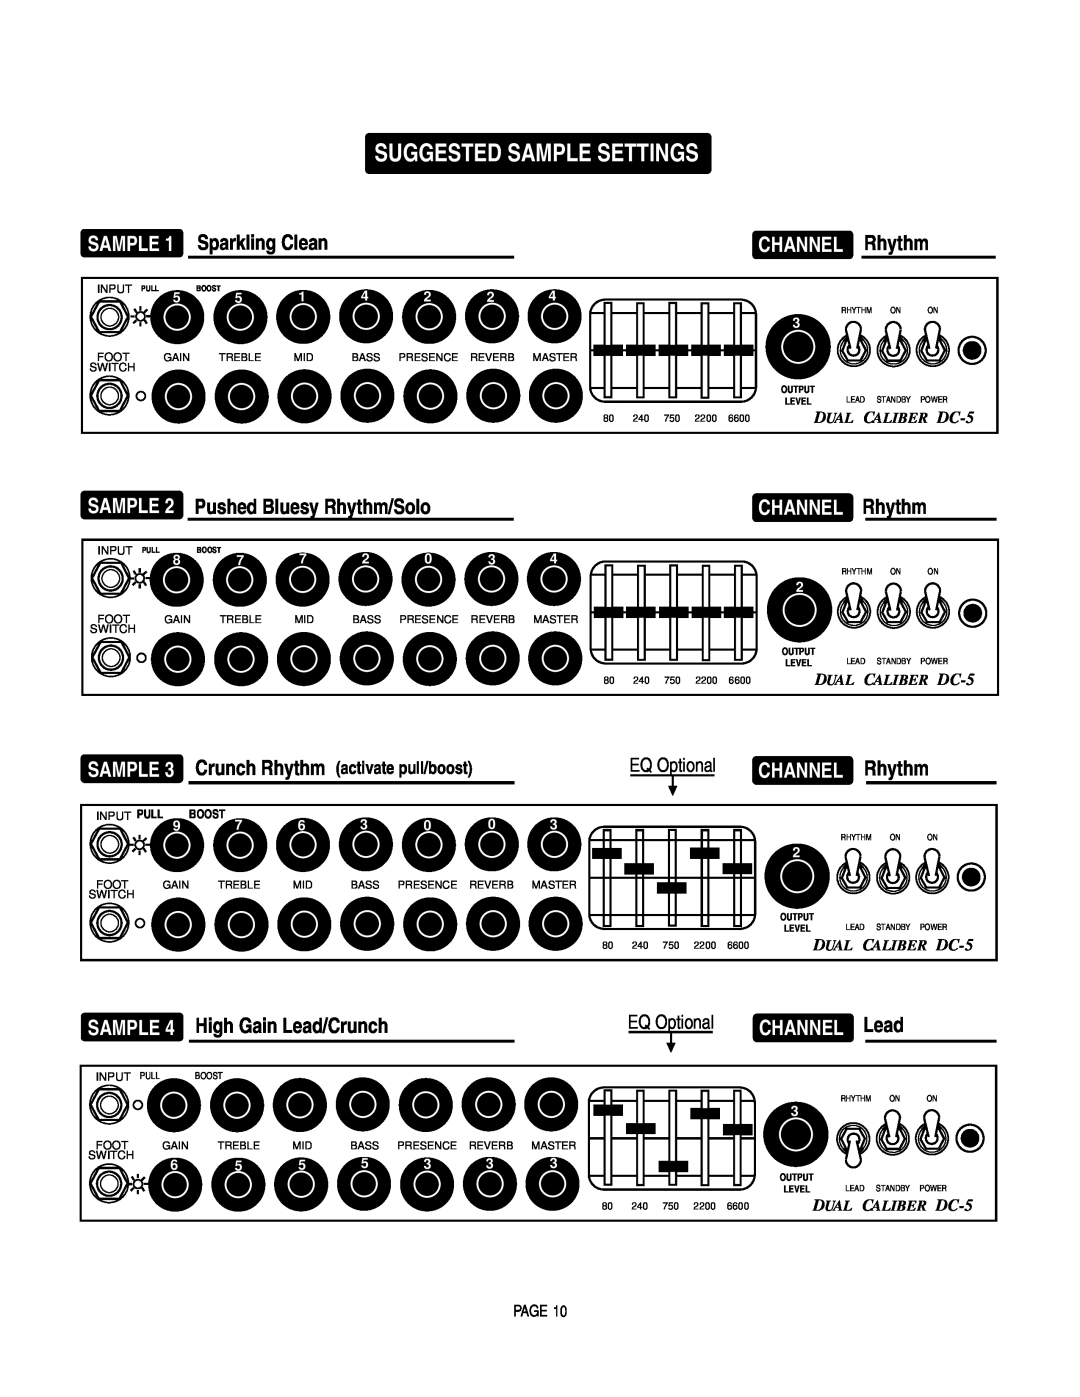 Mesa/Boogie DC5 Suggested Sample Settings, SAMPLE 1 Sparkling Clean, CHANNEL Rhythm, SAMPLE 2 Pushed Bluesy Rhythm/Solo 